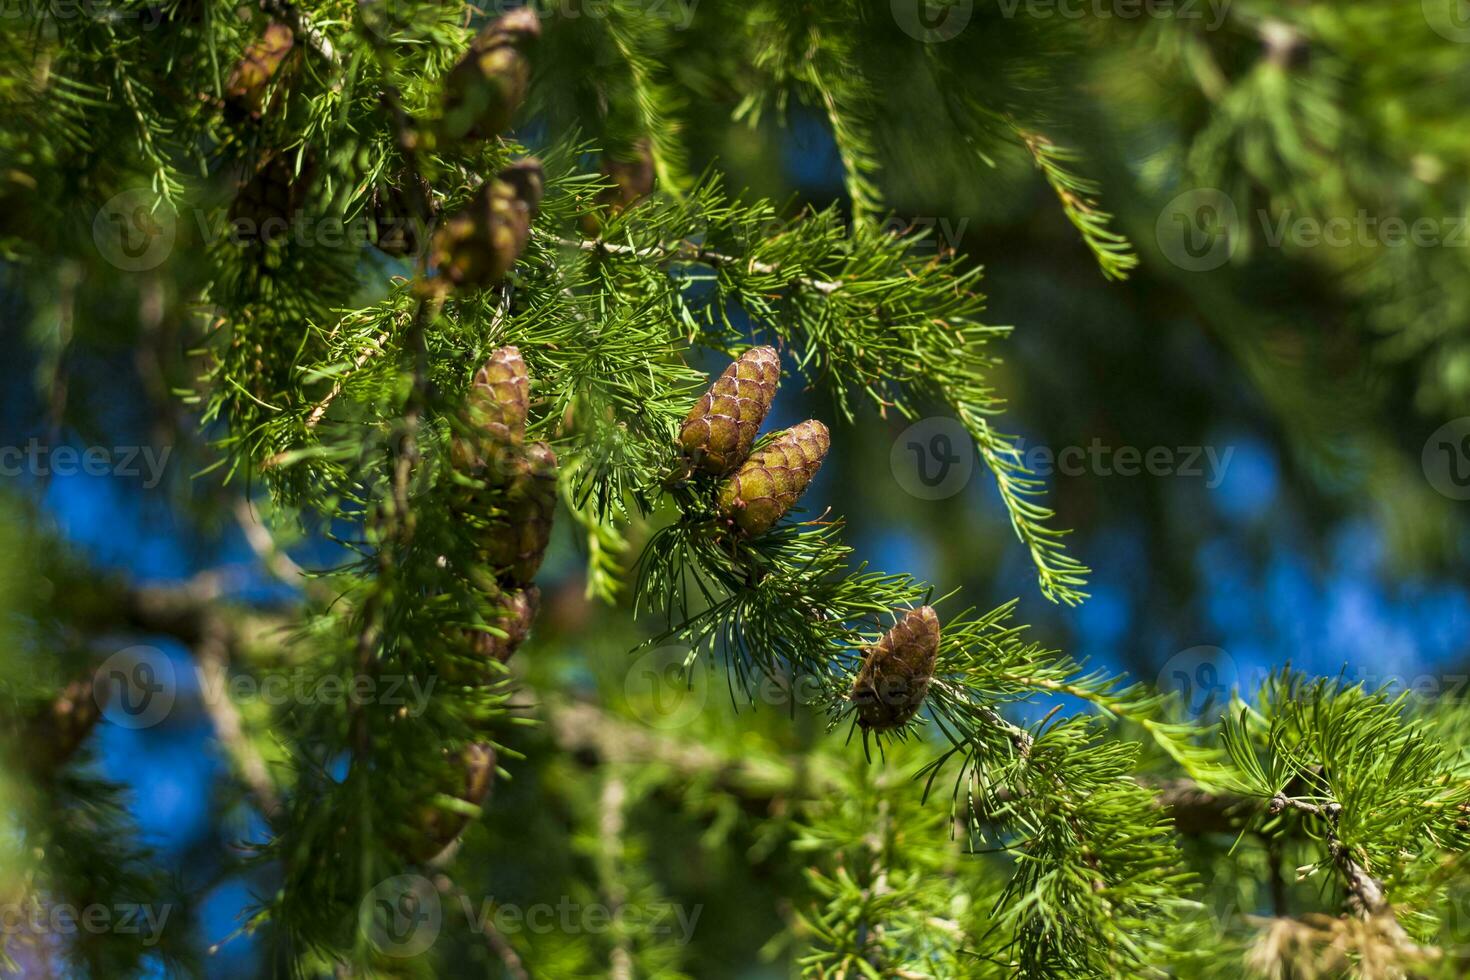 Spruce branches are decorated with young cones. Cones close-up. Close-up on blurred greenery with copying of space, using as a background the natural landscape, ecology, photo